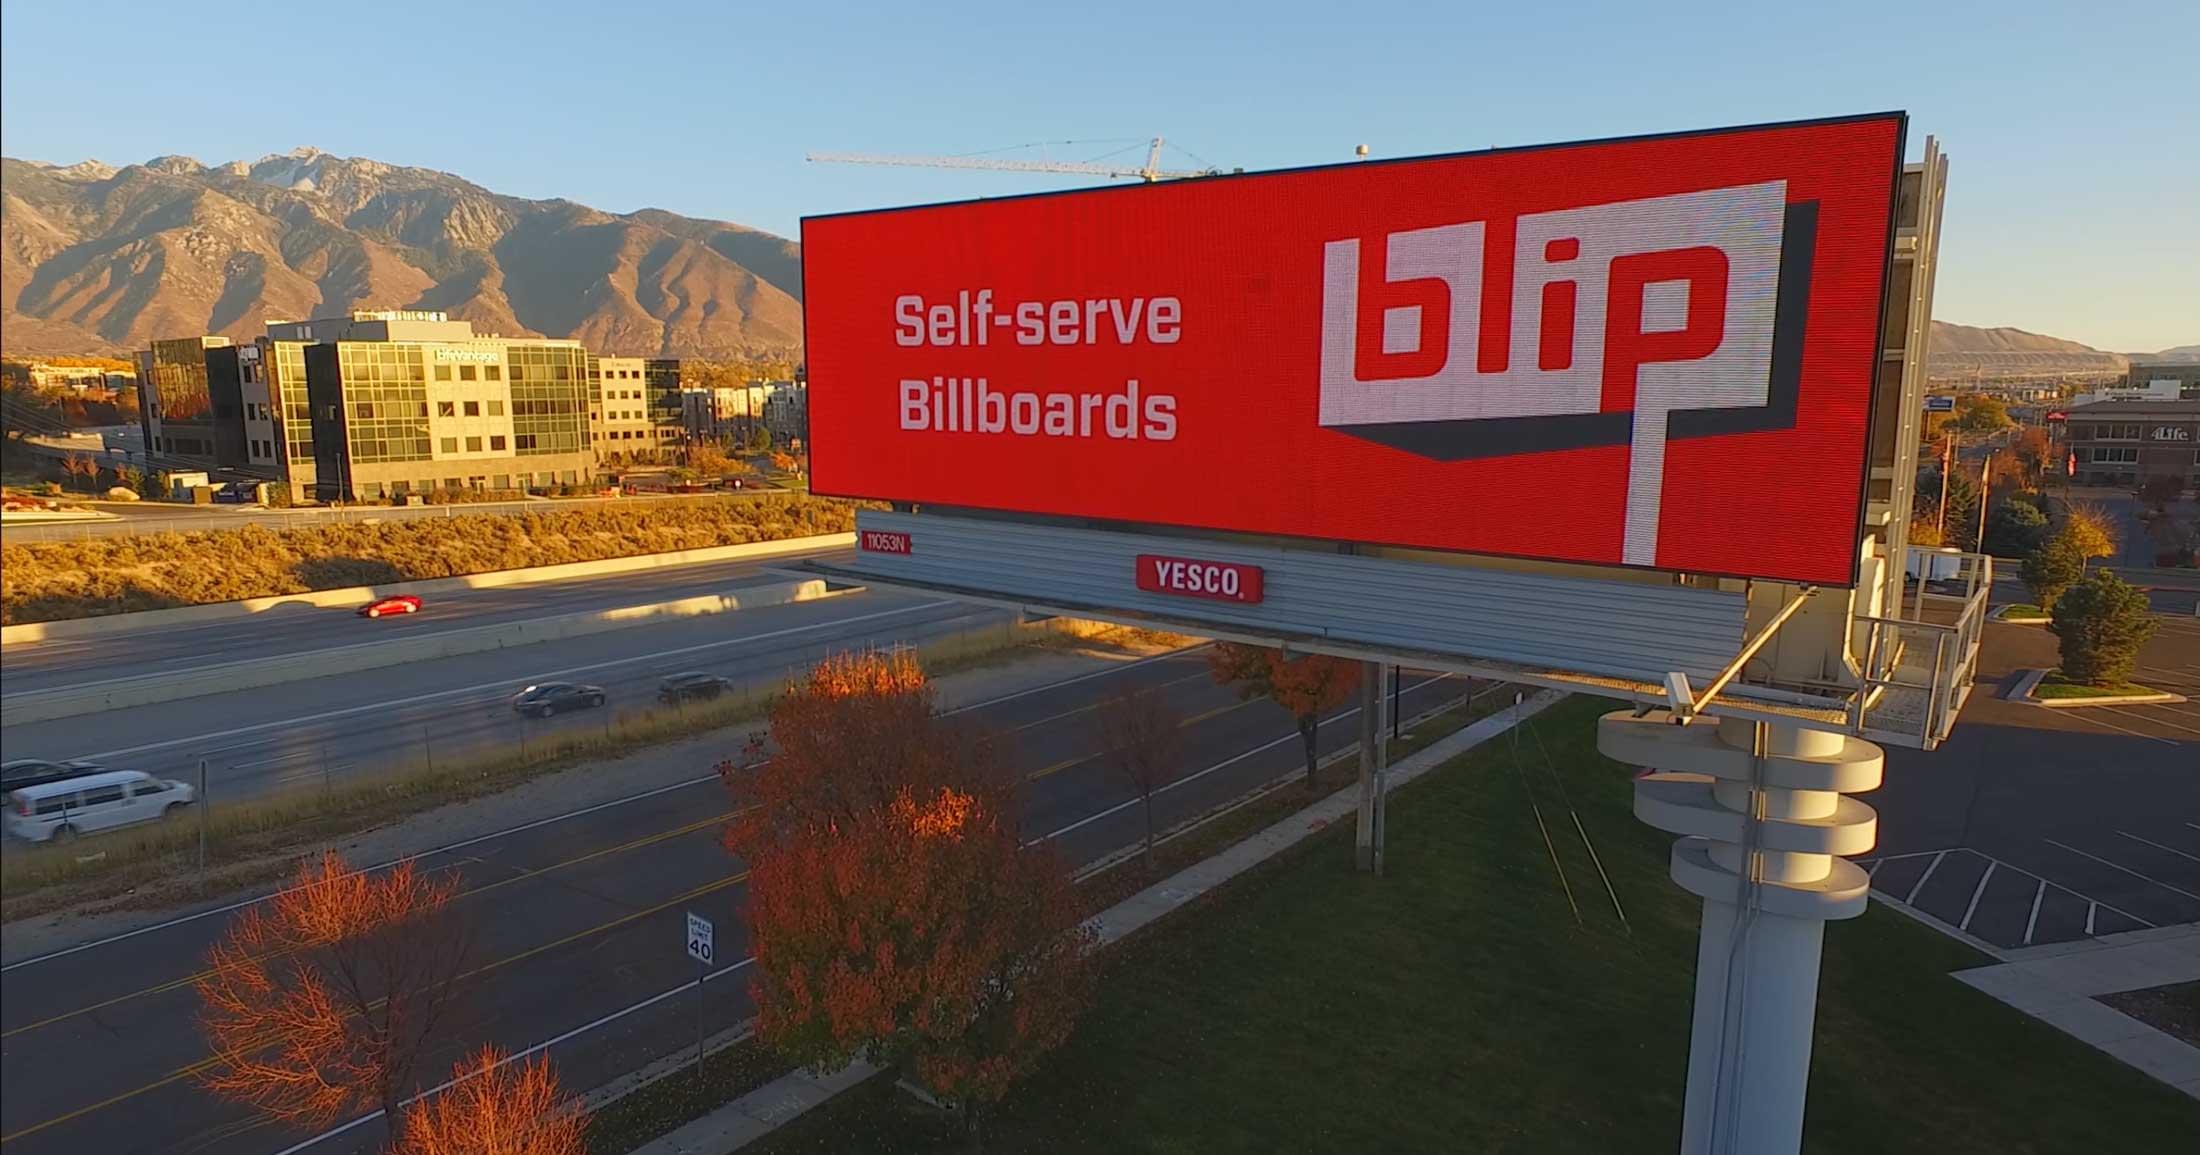 Image of an ad advertising billboards